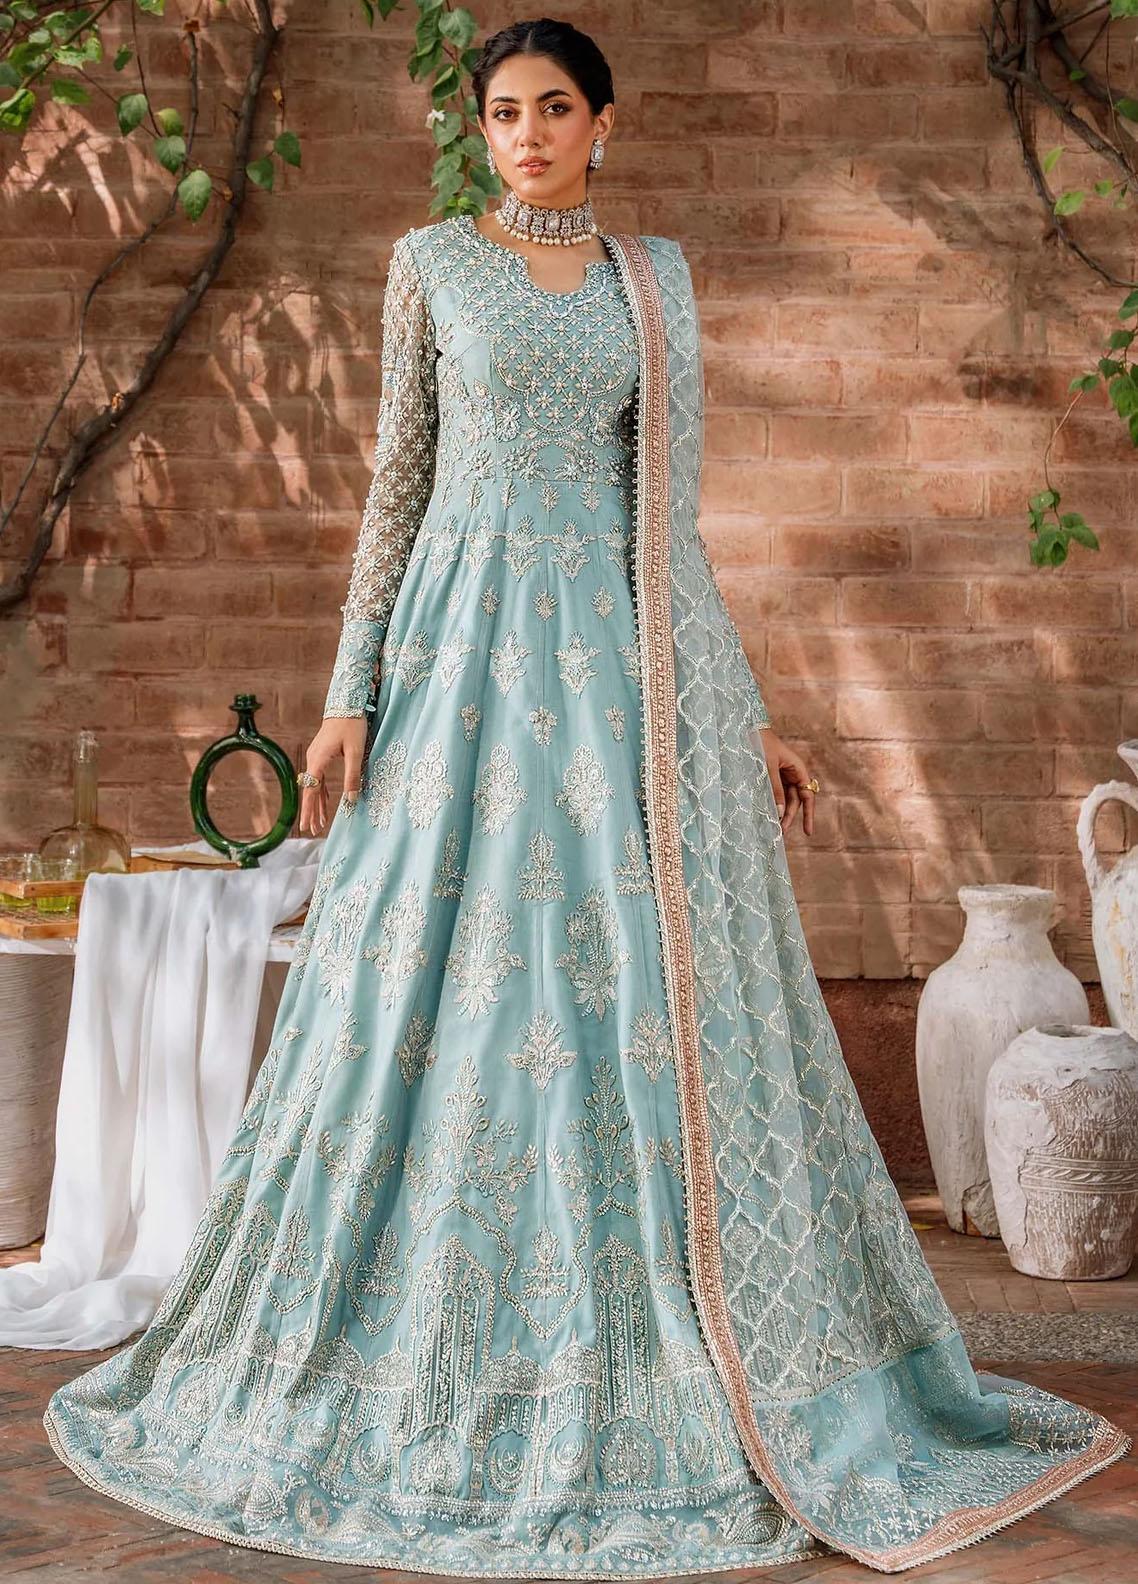 Mastani By Akbar Aslam Embroidered Net Suits Unstitched 3 Piece  1487 jabeen